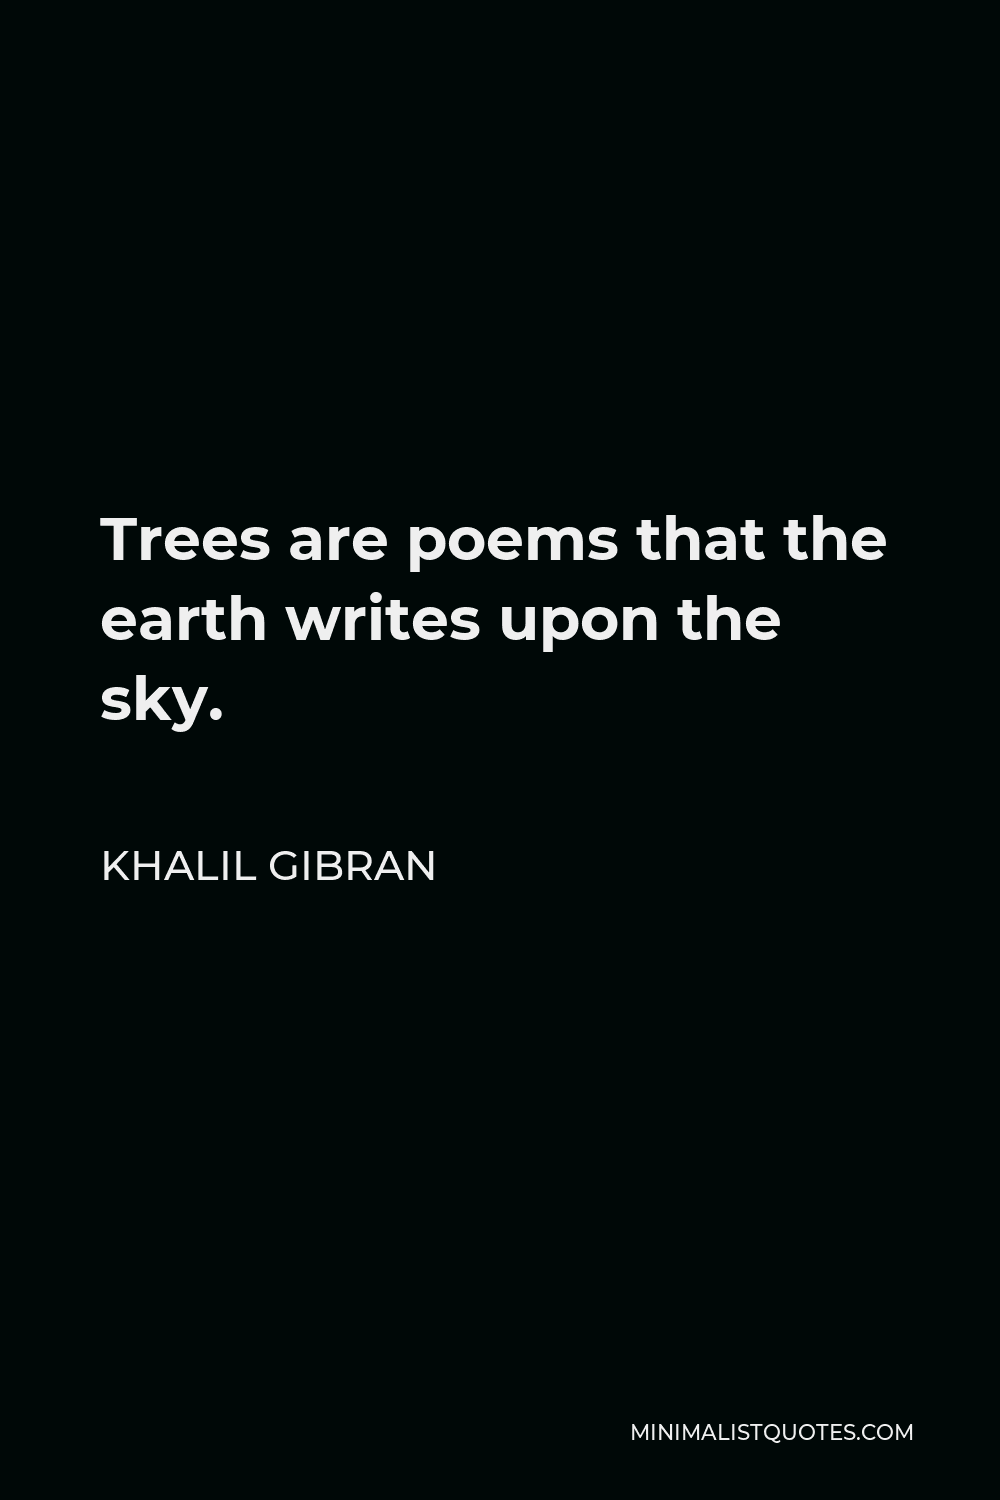 Khalil Gibran Quote - Trees are poems that the earth writes upon the sky.